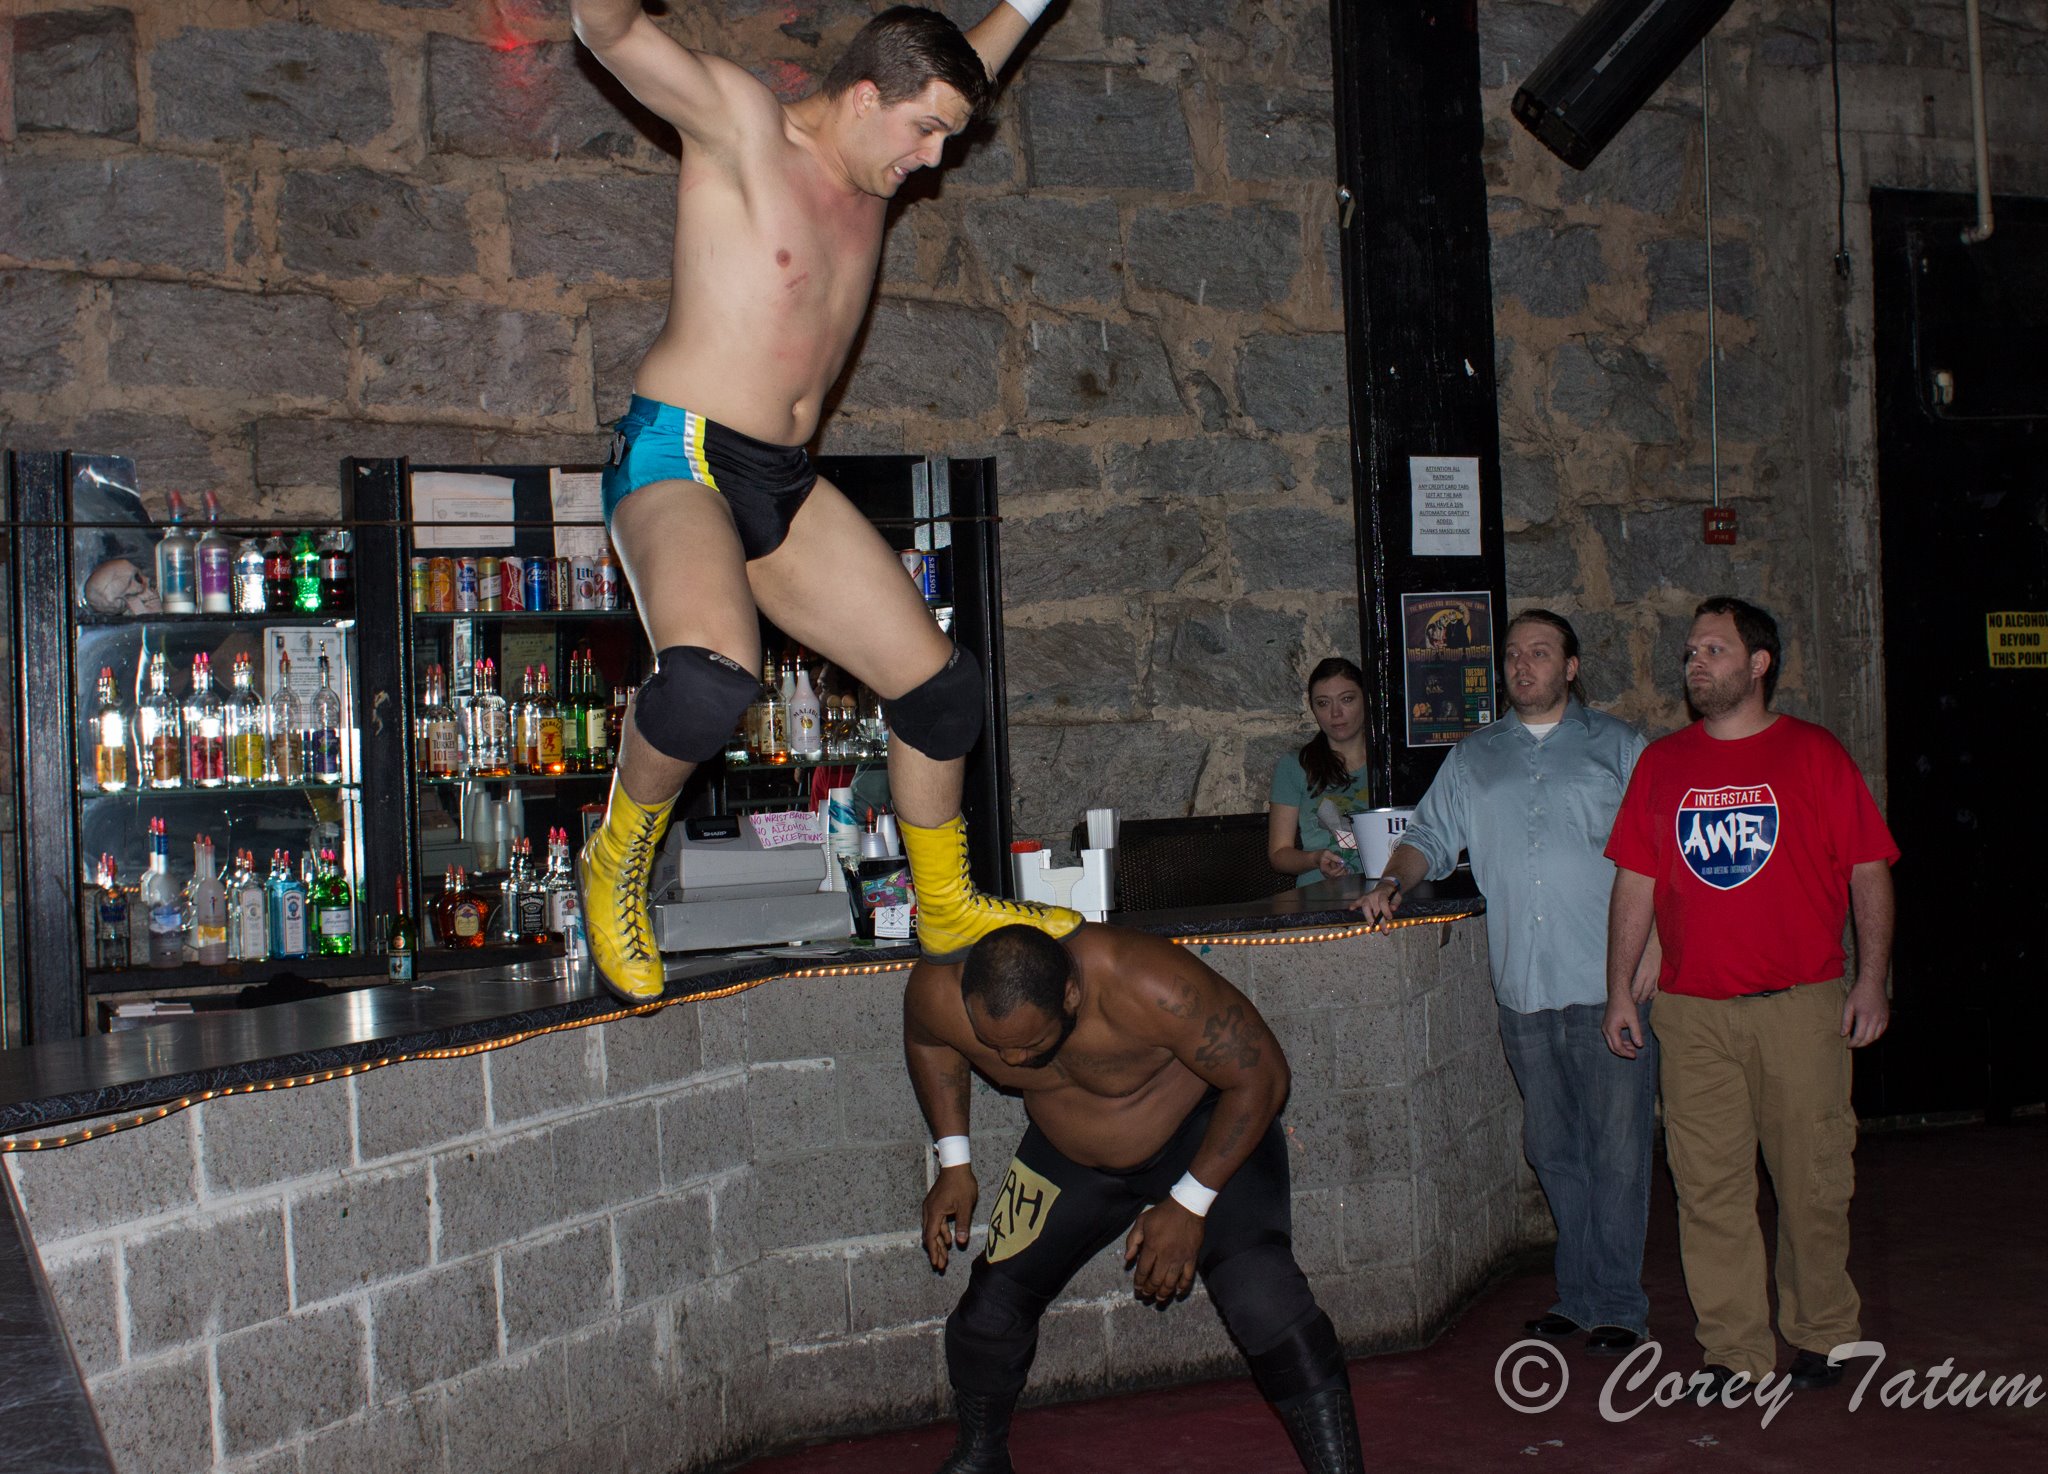 Nick Iggy flying off the bar at the Masquerade